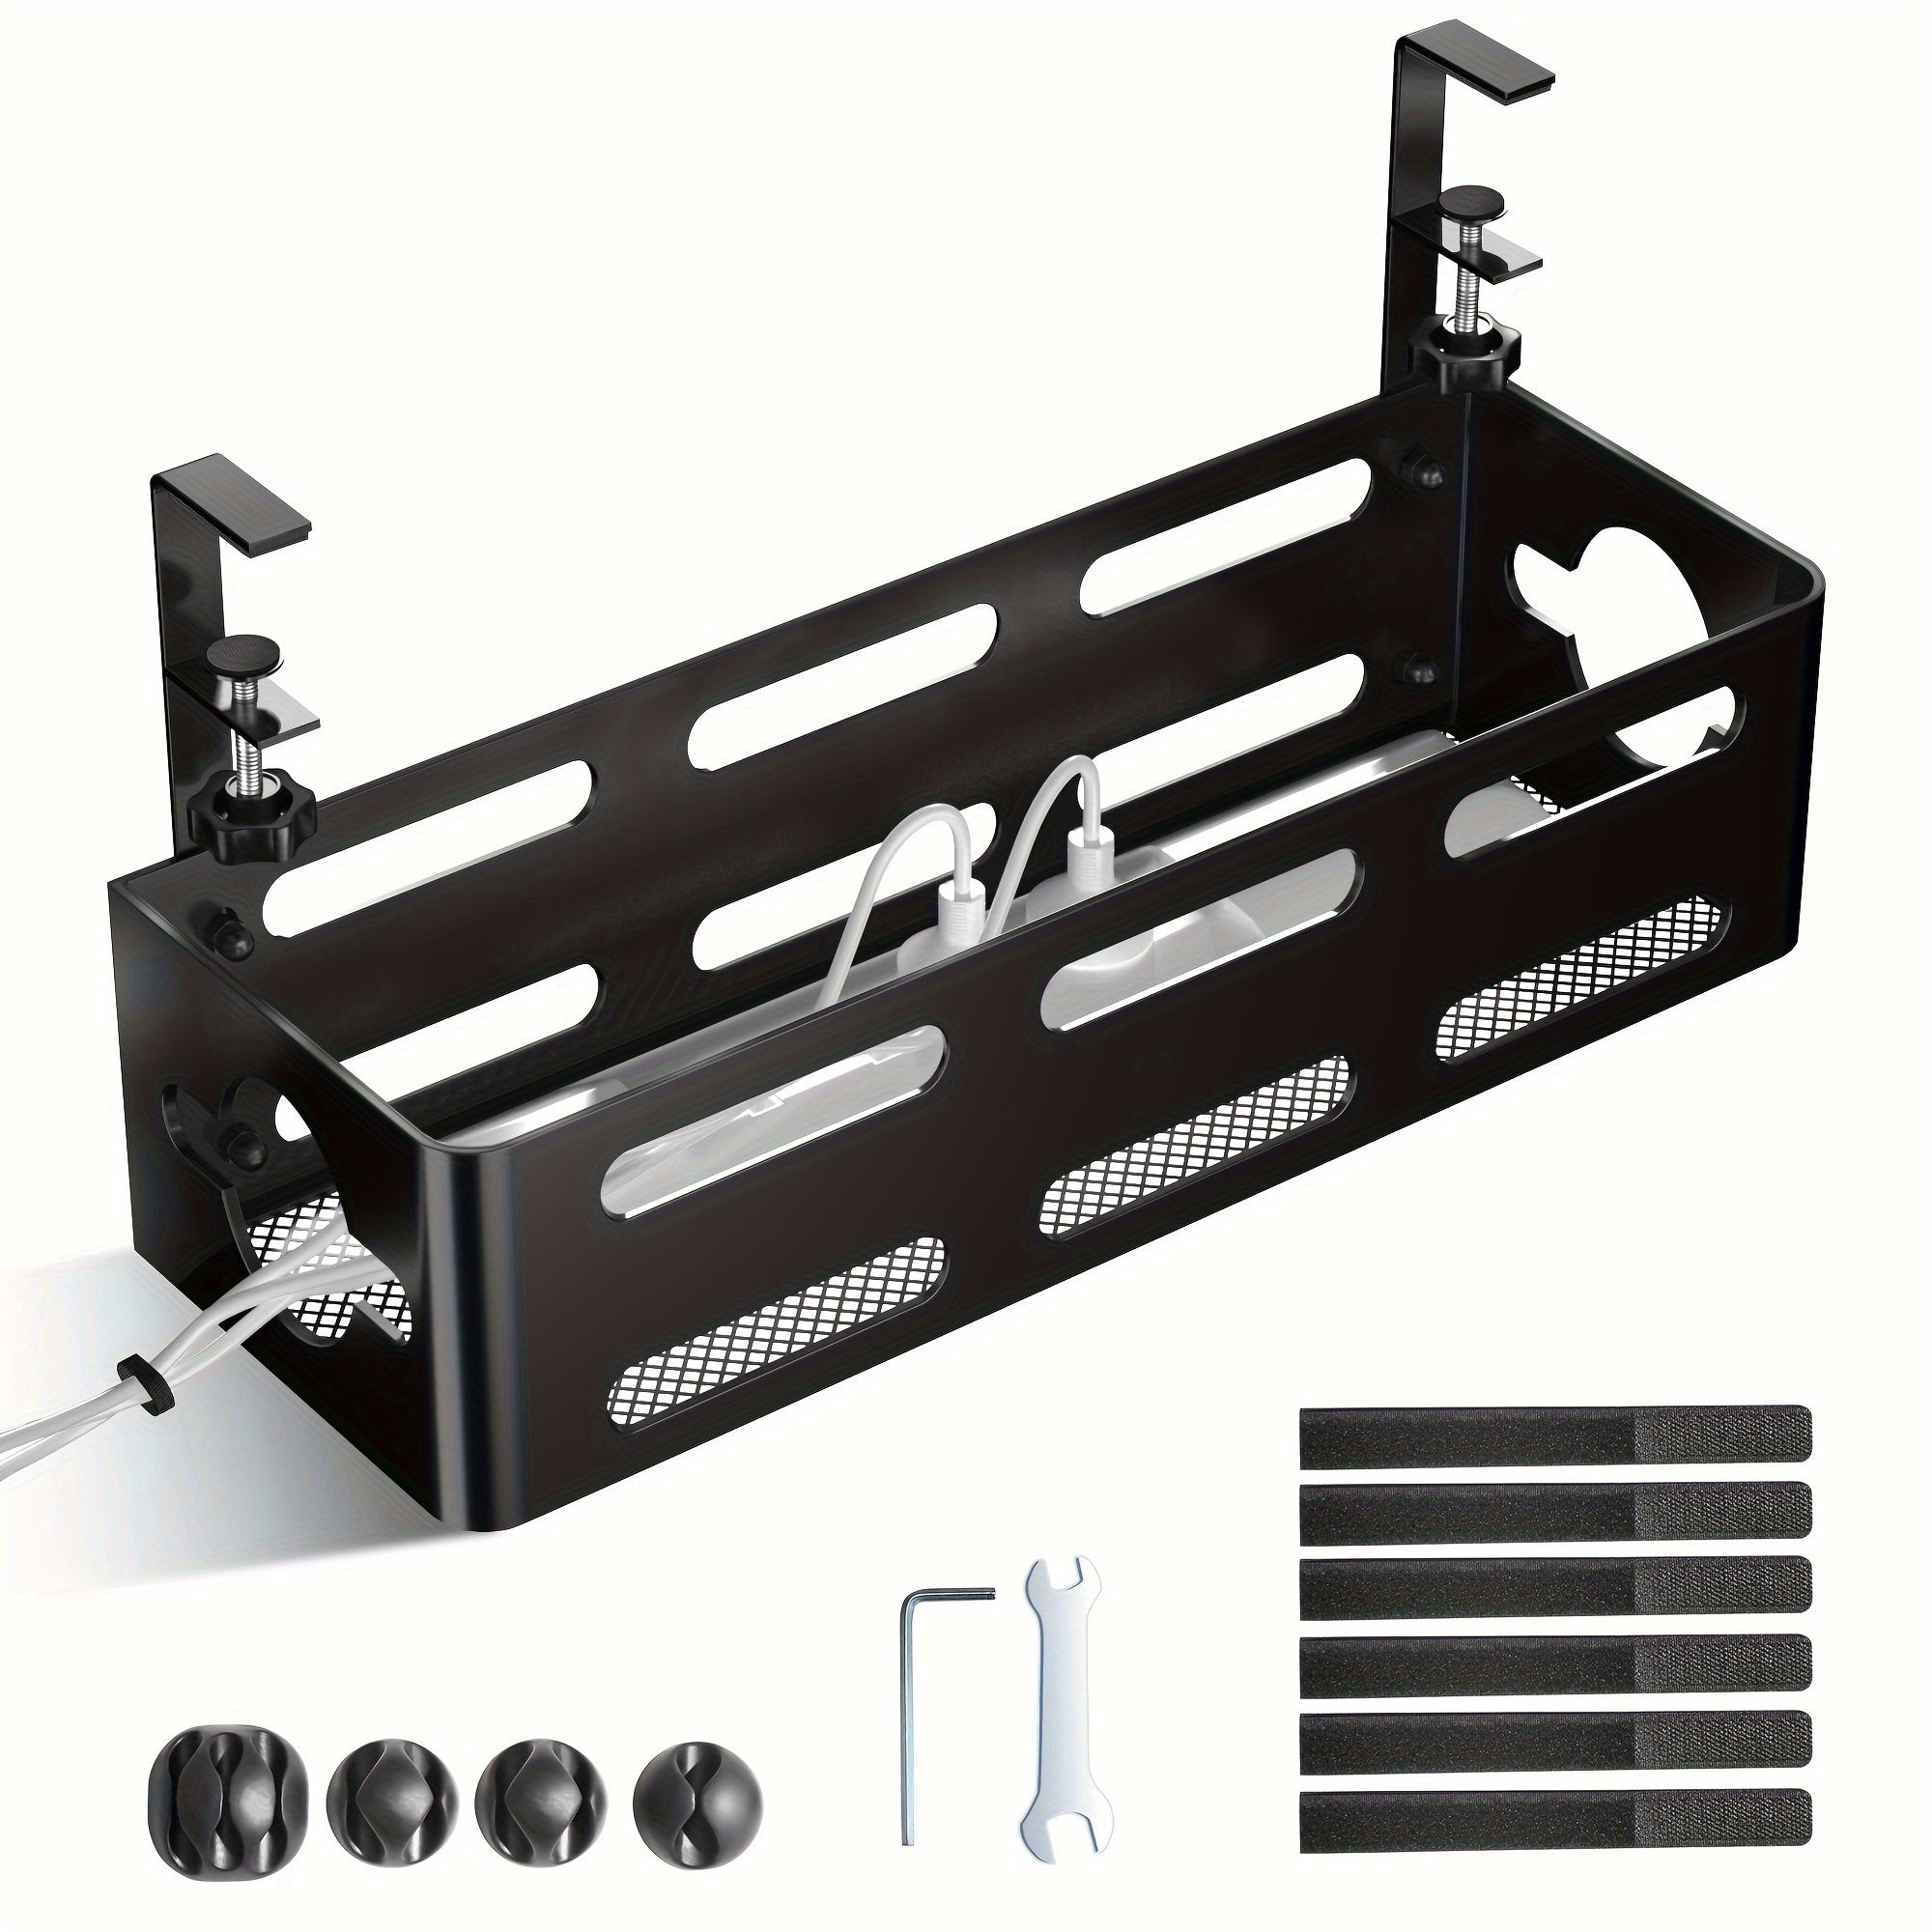 

Under Desk Cable Management Tray, Cable Management Under Desk No Drill, Metal Cable Management Box With Desk Cord Organizers & Desk Cable Management Kit To Conceal Wire For Office Home (black/white)